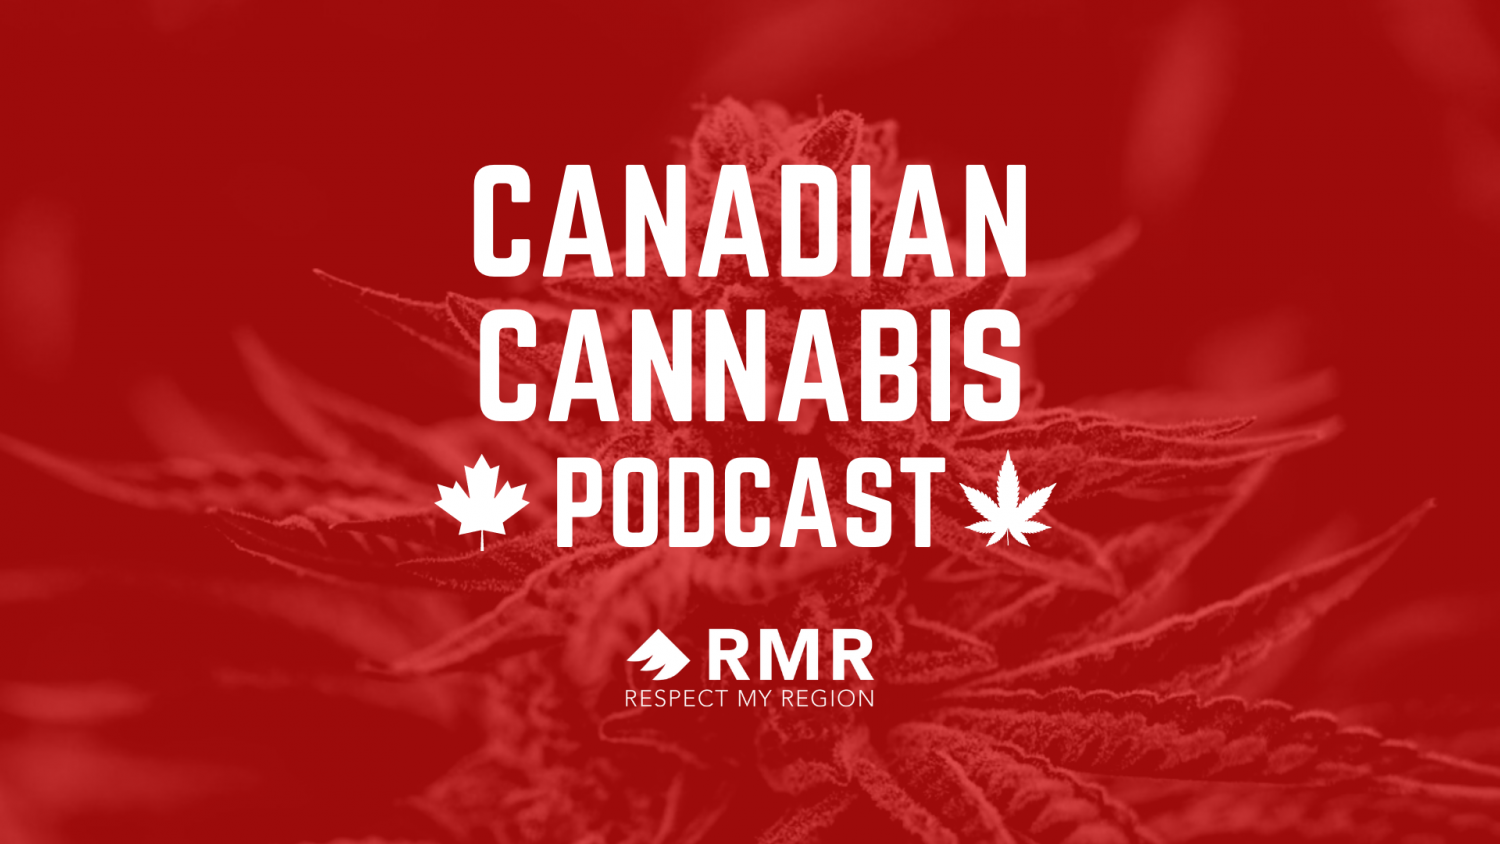 The Canadian Cannabis Podcast